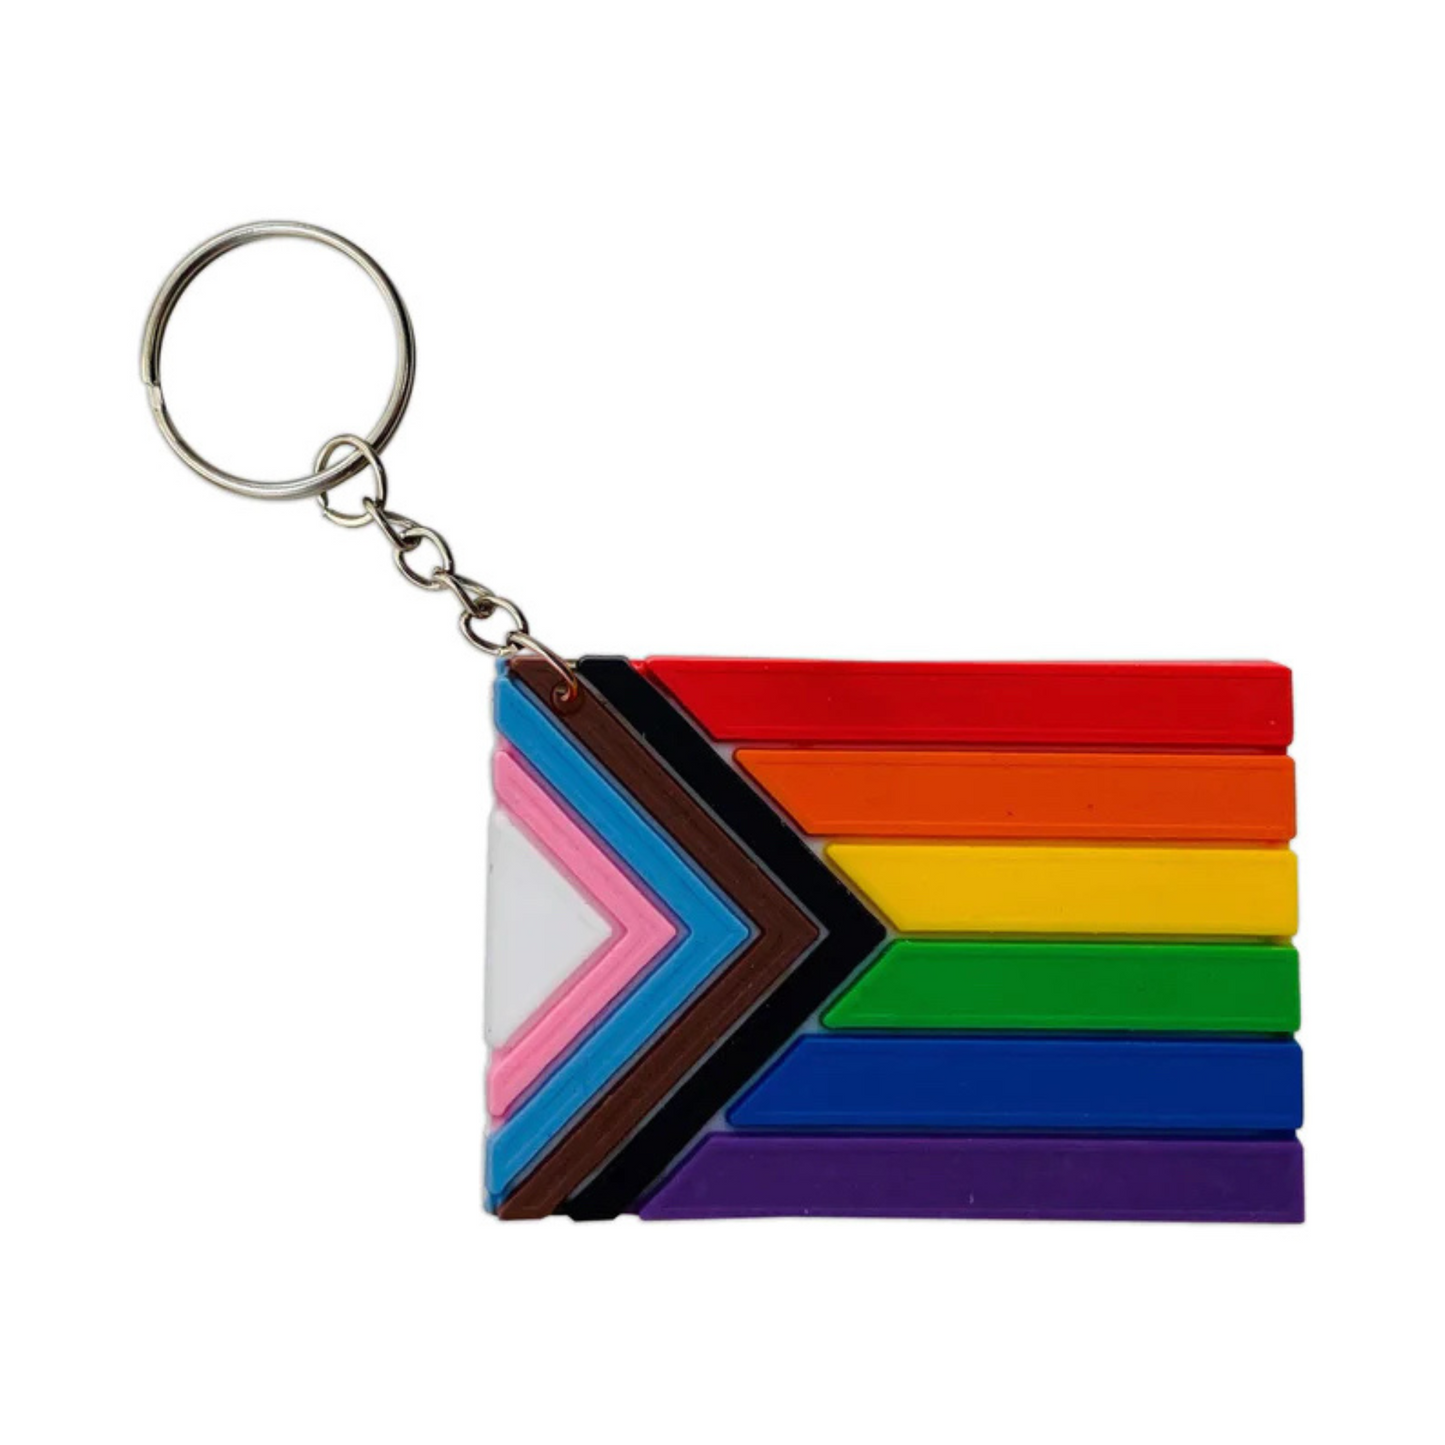 Daniel Qasar Trans and POC Inclusive Progressive Pride Flag in Silicone with Keychain attached to upper right corner next to chevron. In addition to the Chevron having the trans flag colors and eacial incluaivity, next to the chevron are the rainbow flag colors with red at the top going sown to orange, yellow, green, blue, and lastly purple. 